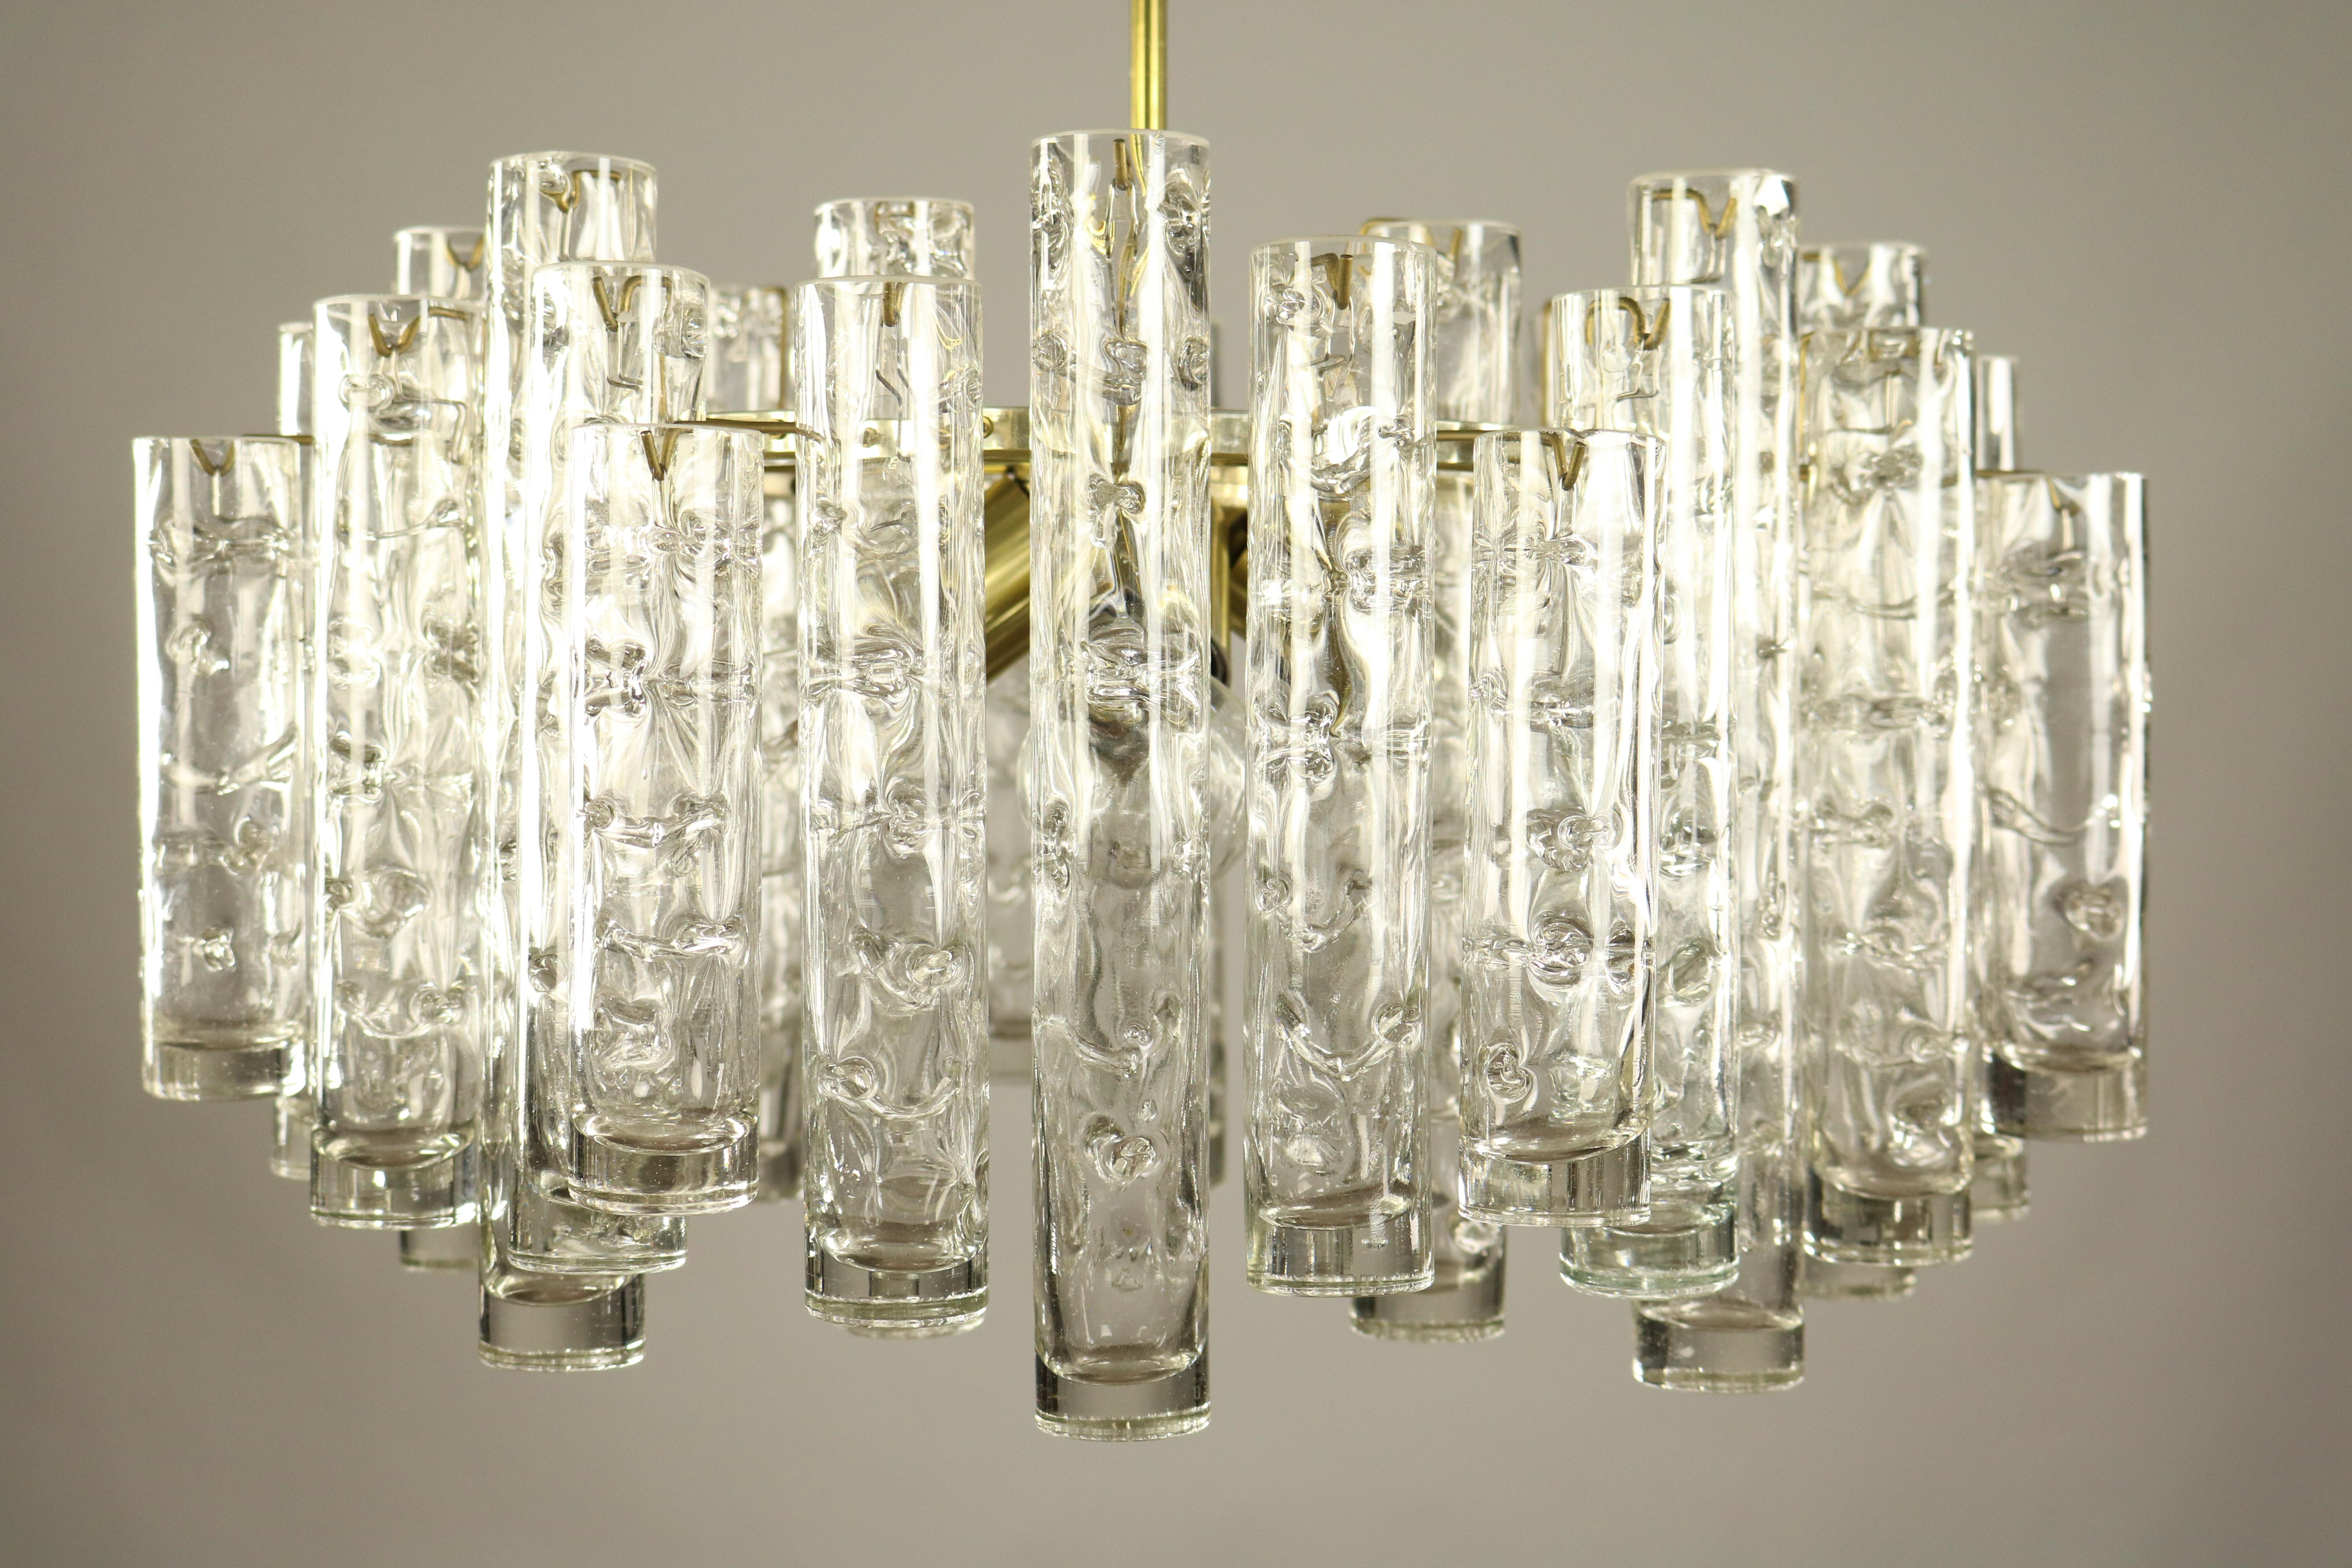 1960s Doria glass tube (one side closed glasses) chandelier
made of 36 hand blown tubes in three different length 11'' - 8 3/4'' - 6 1/3'' diameter glass tubes 1 1/2''
and a frame of aluminum and steel
total diameter 24 1/2'' / height total 27